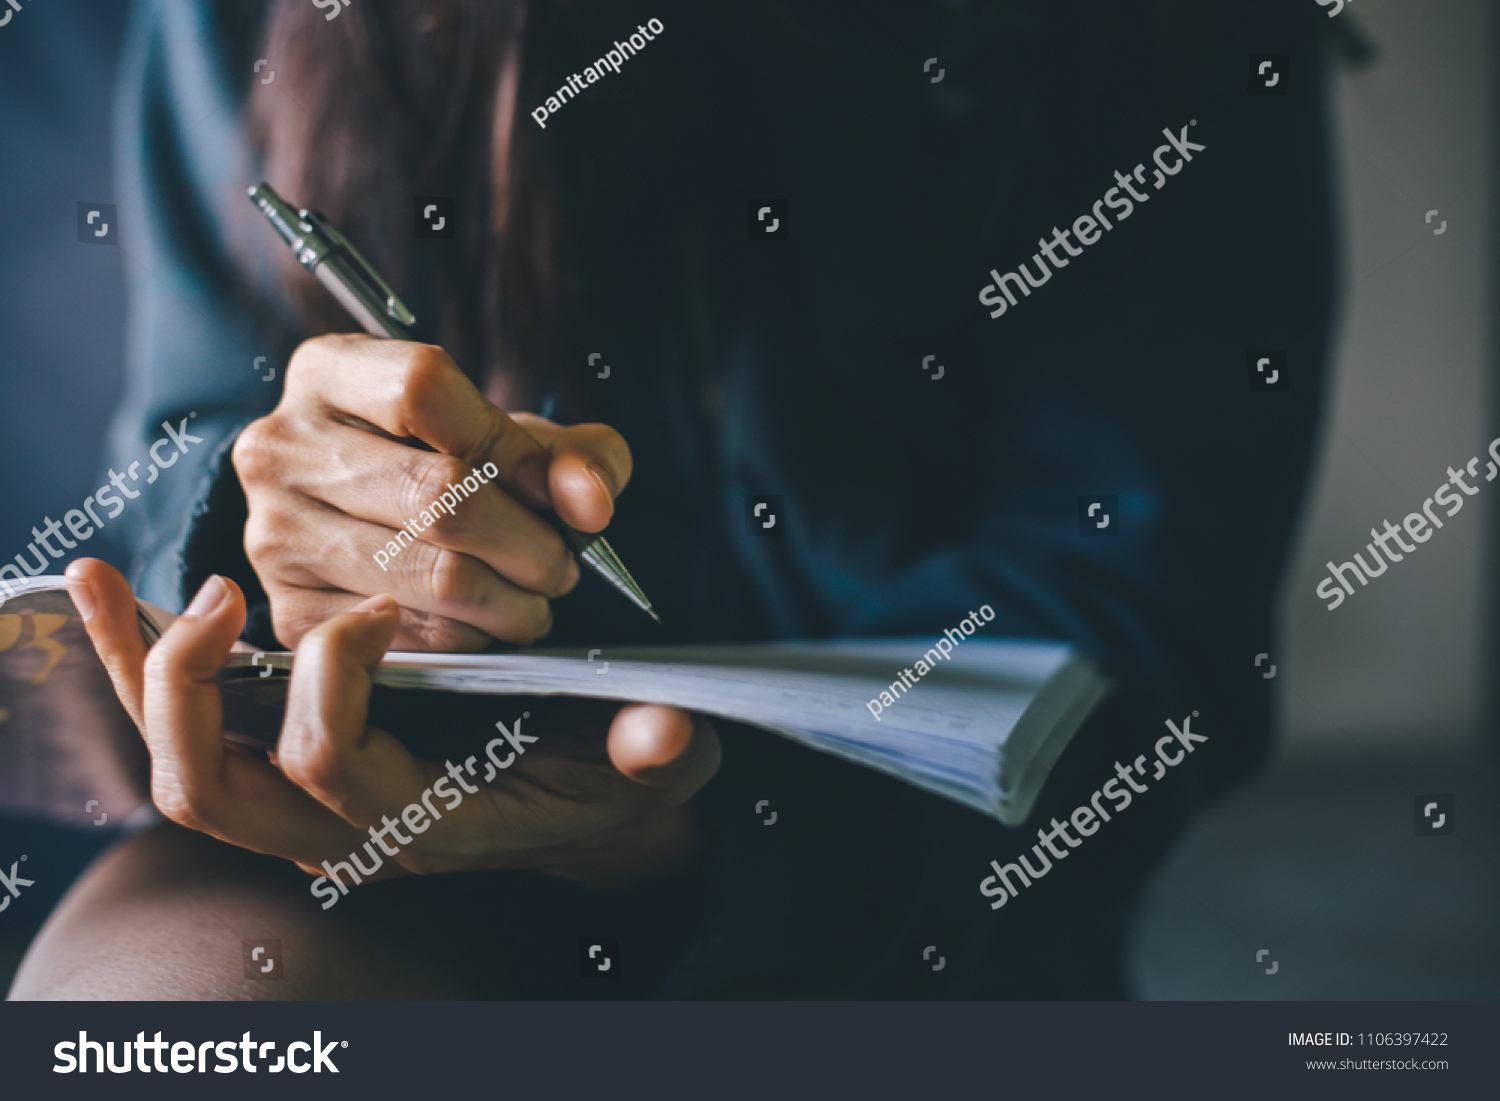 soft focus.hand high school or university student in casual holding pencil writing on paper answer sheet.sitting on lecture chair taking final exam or study attending in examination room or classroom #1106397422